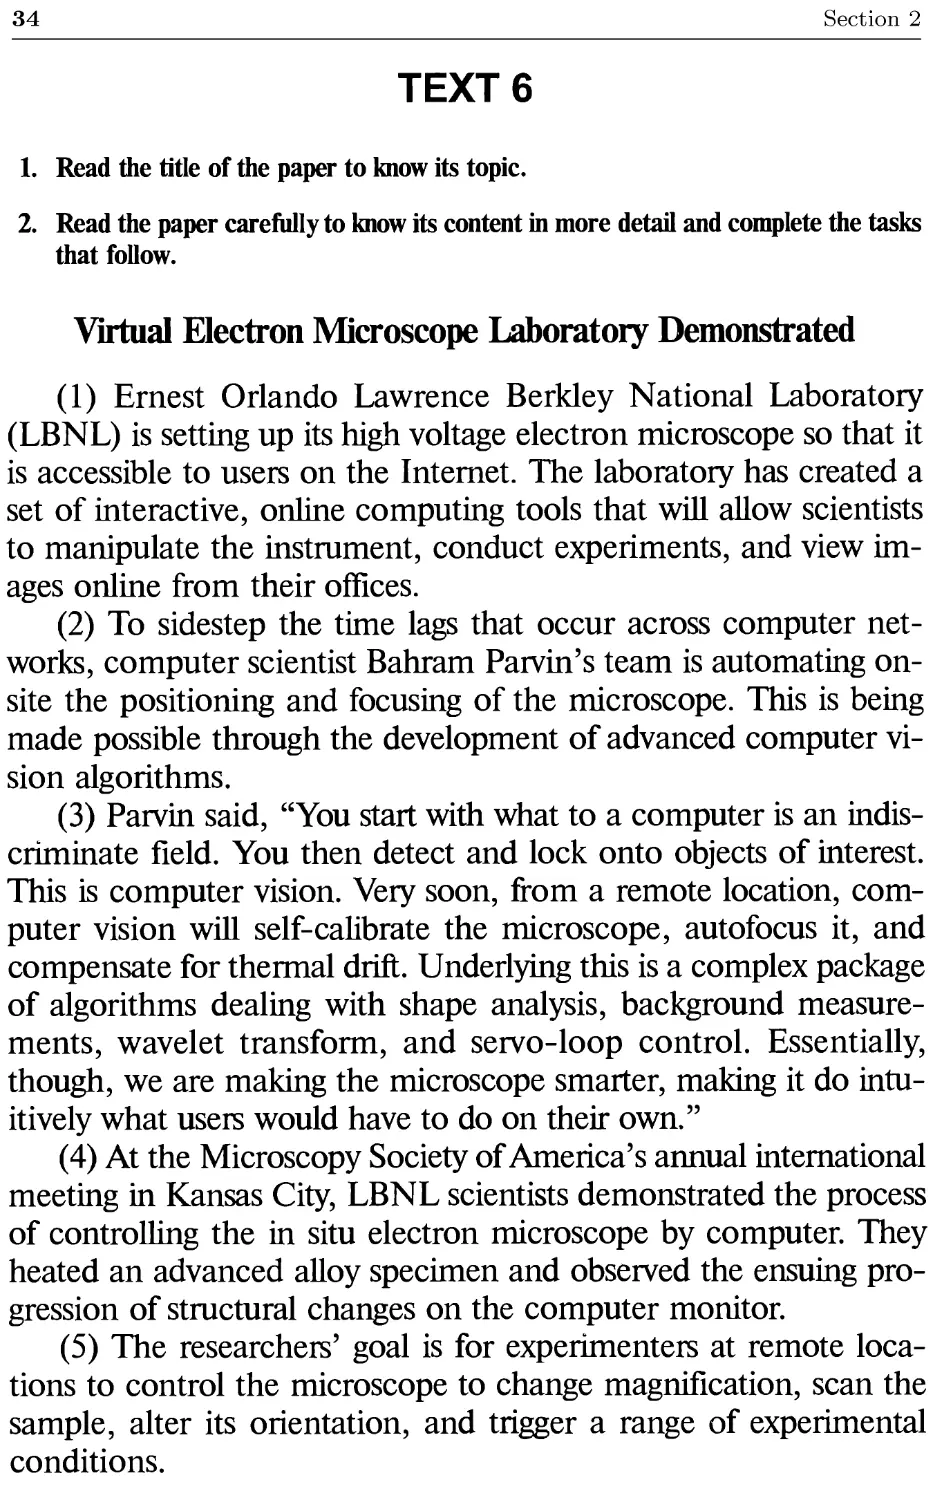 Text 6. Virtual Electron Microscope Laboratory Demonstrated